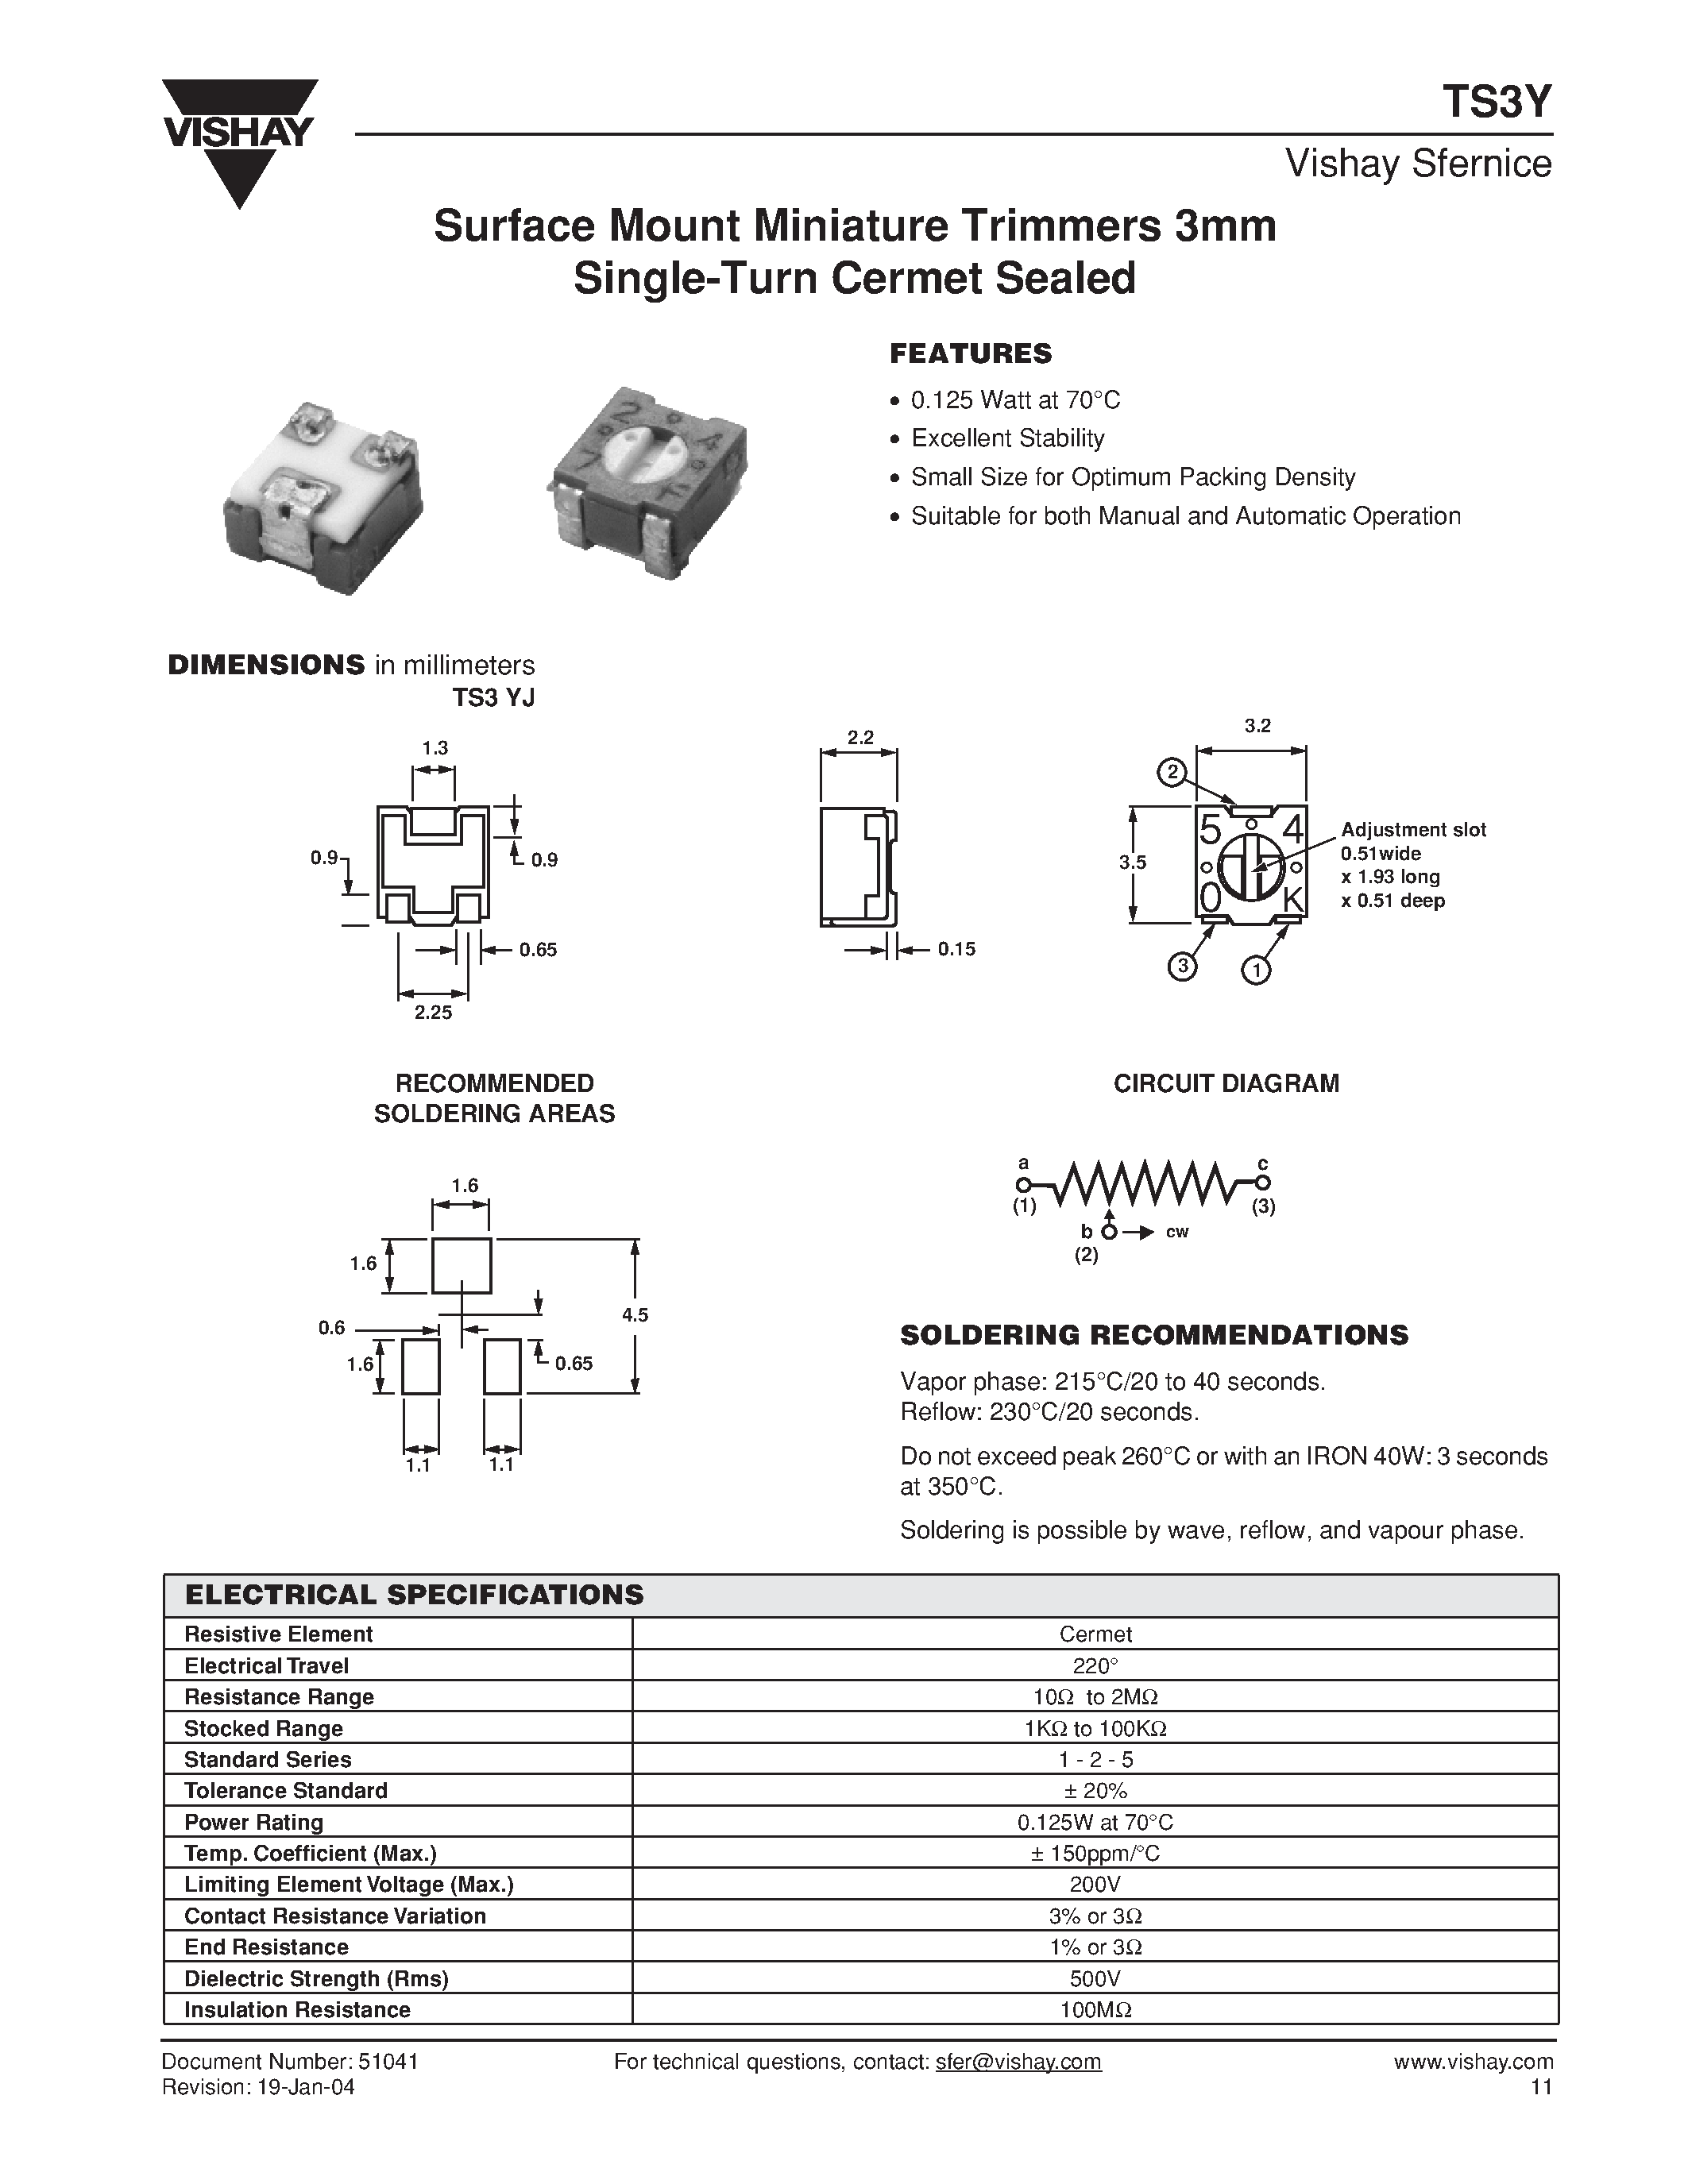 Datasheet TS3Y - Surface Mount Miniature Trimmers 3mm Single-Turn Cermet Sealed page 1